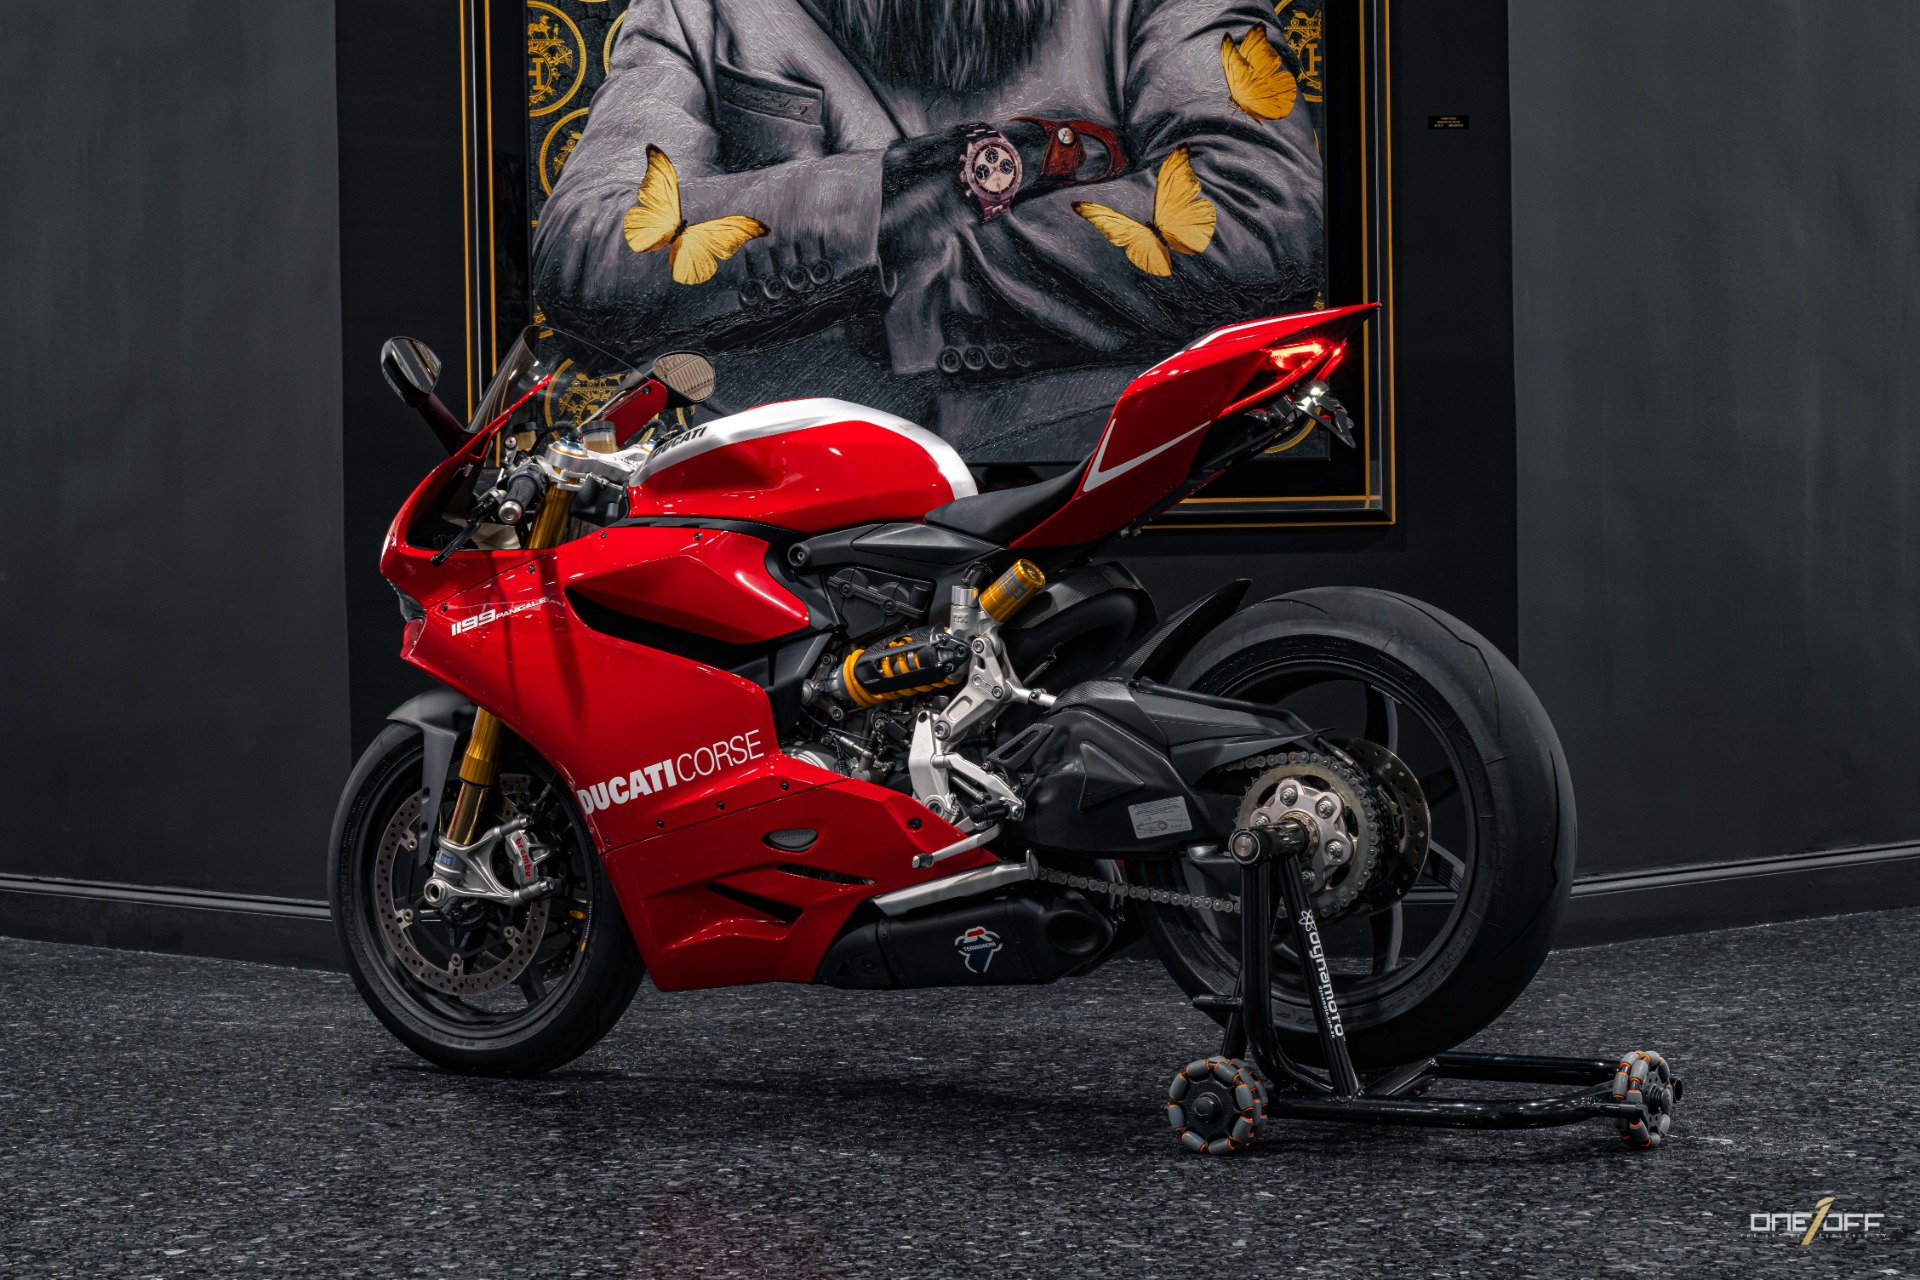 Used 2013 Ducati 1199 Panigale R One of 500 + BST $4.5K Carbon